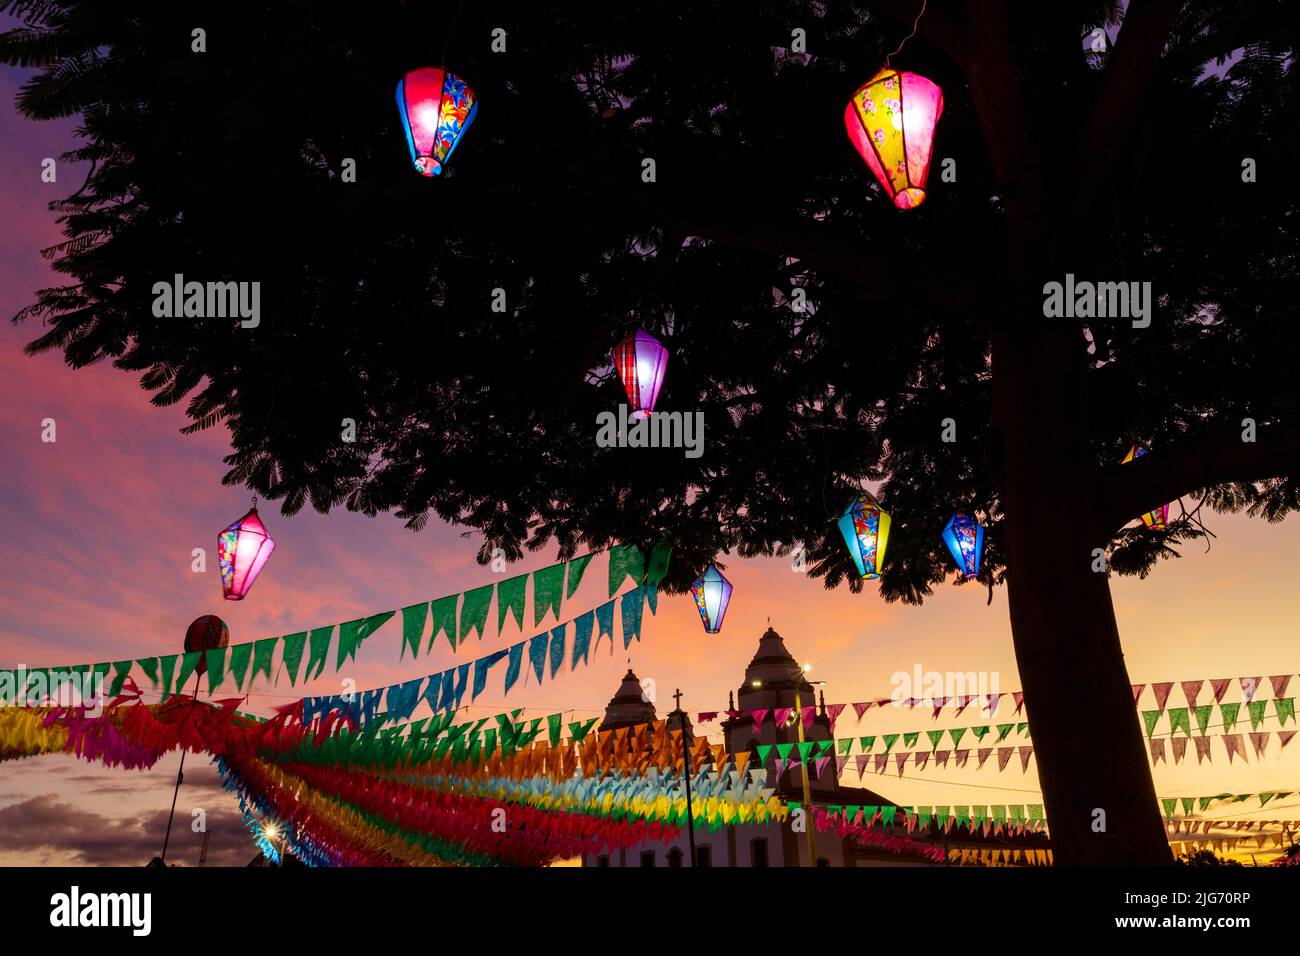 festa junina decoration with illuminated decorative balloon and colorful flags in front of são joão church Stock Photo